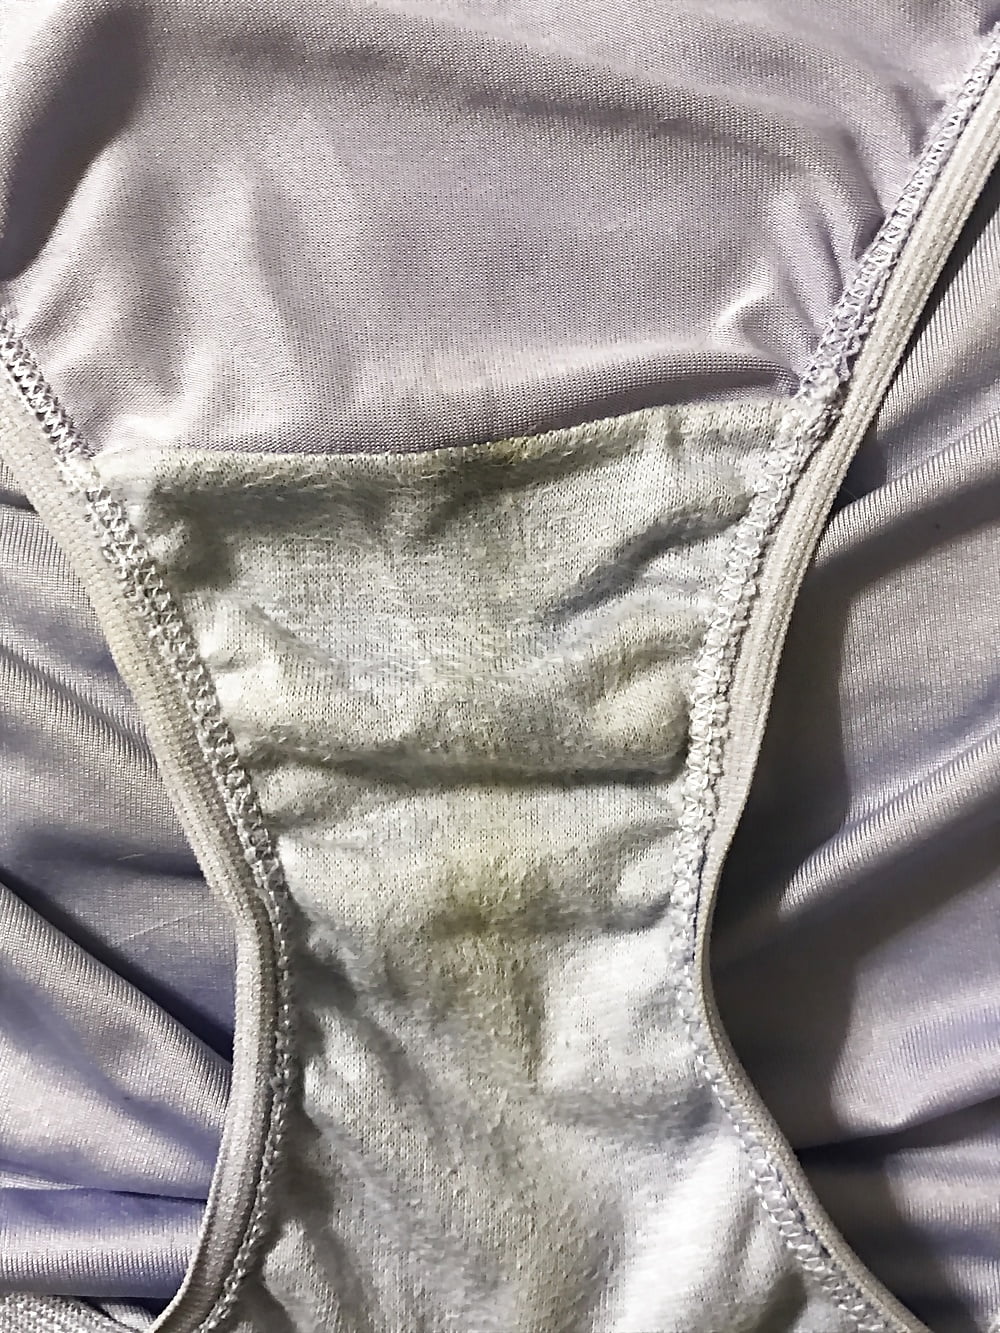 Free Wife's dirty, smelly panties photos